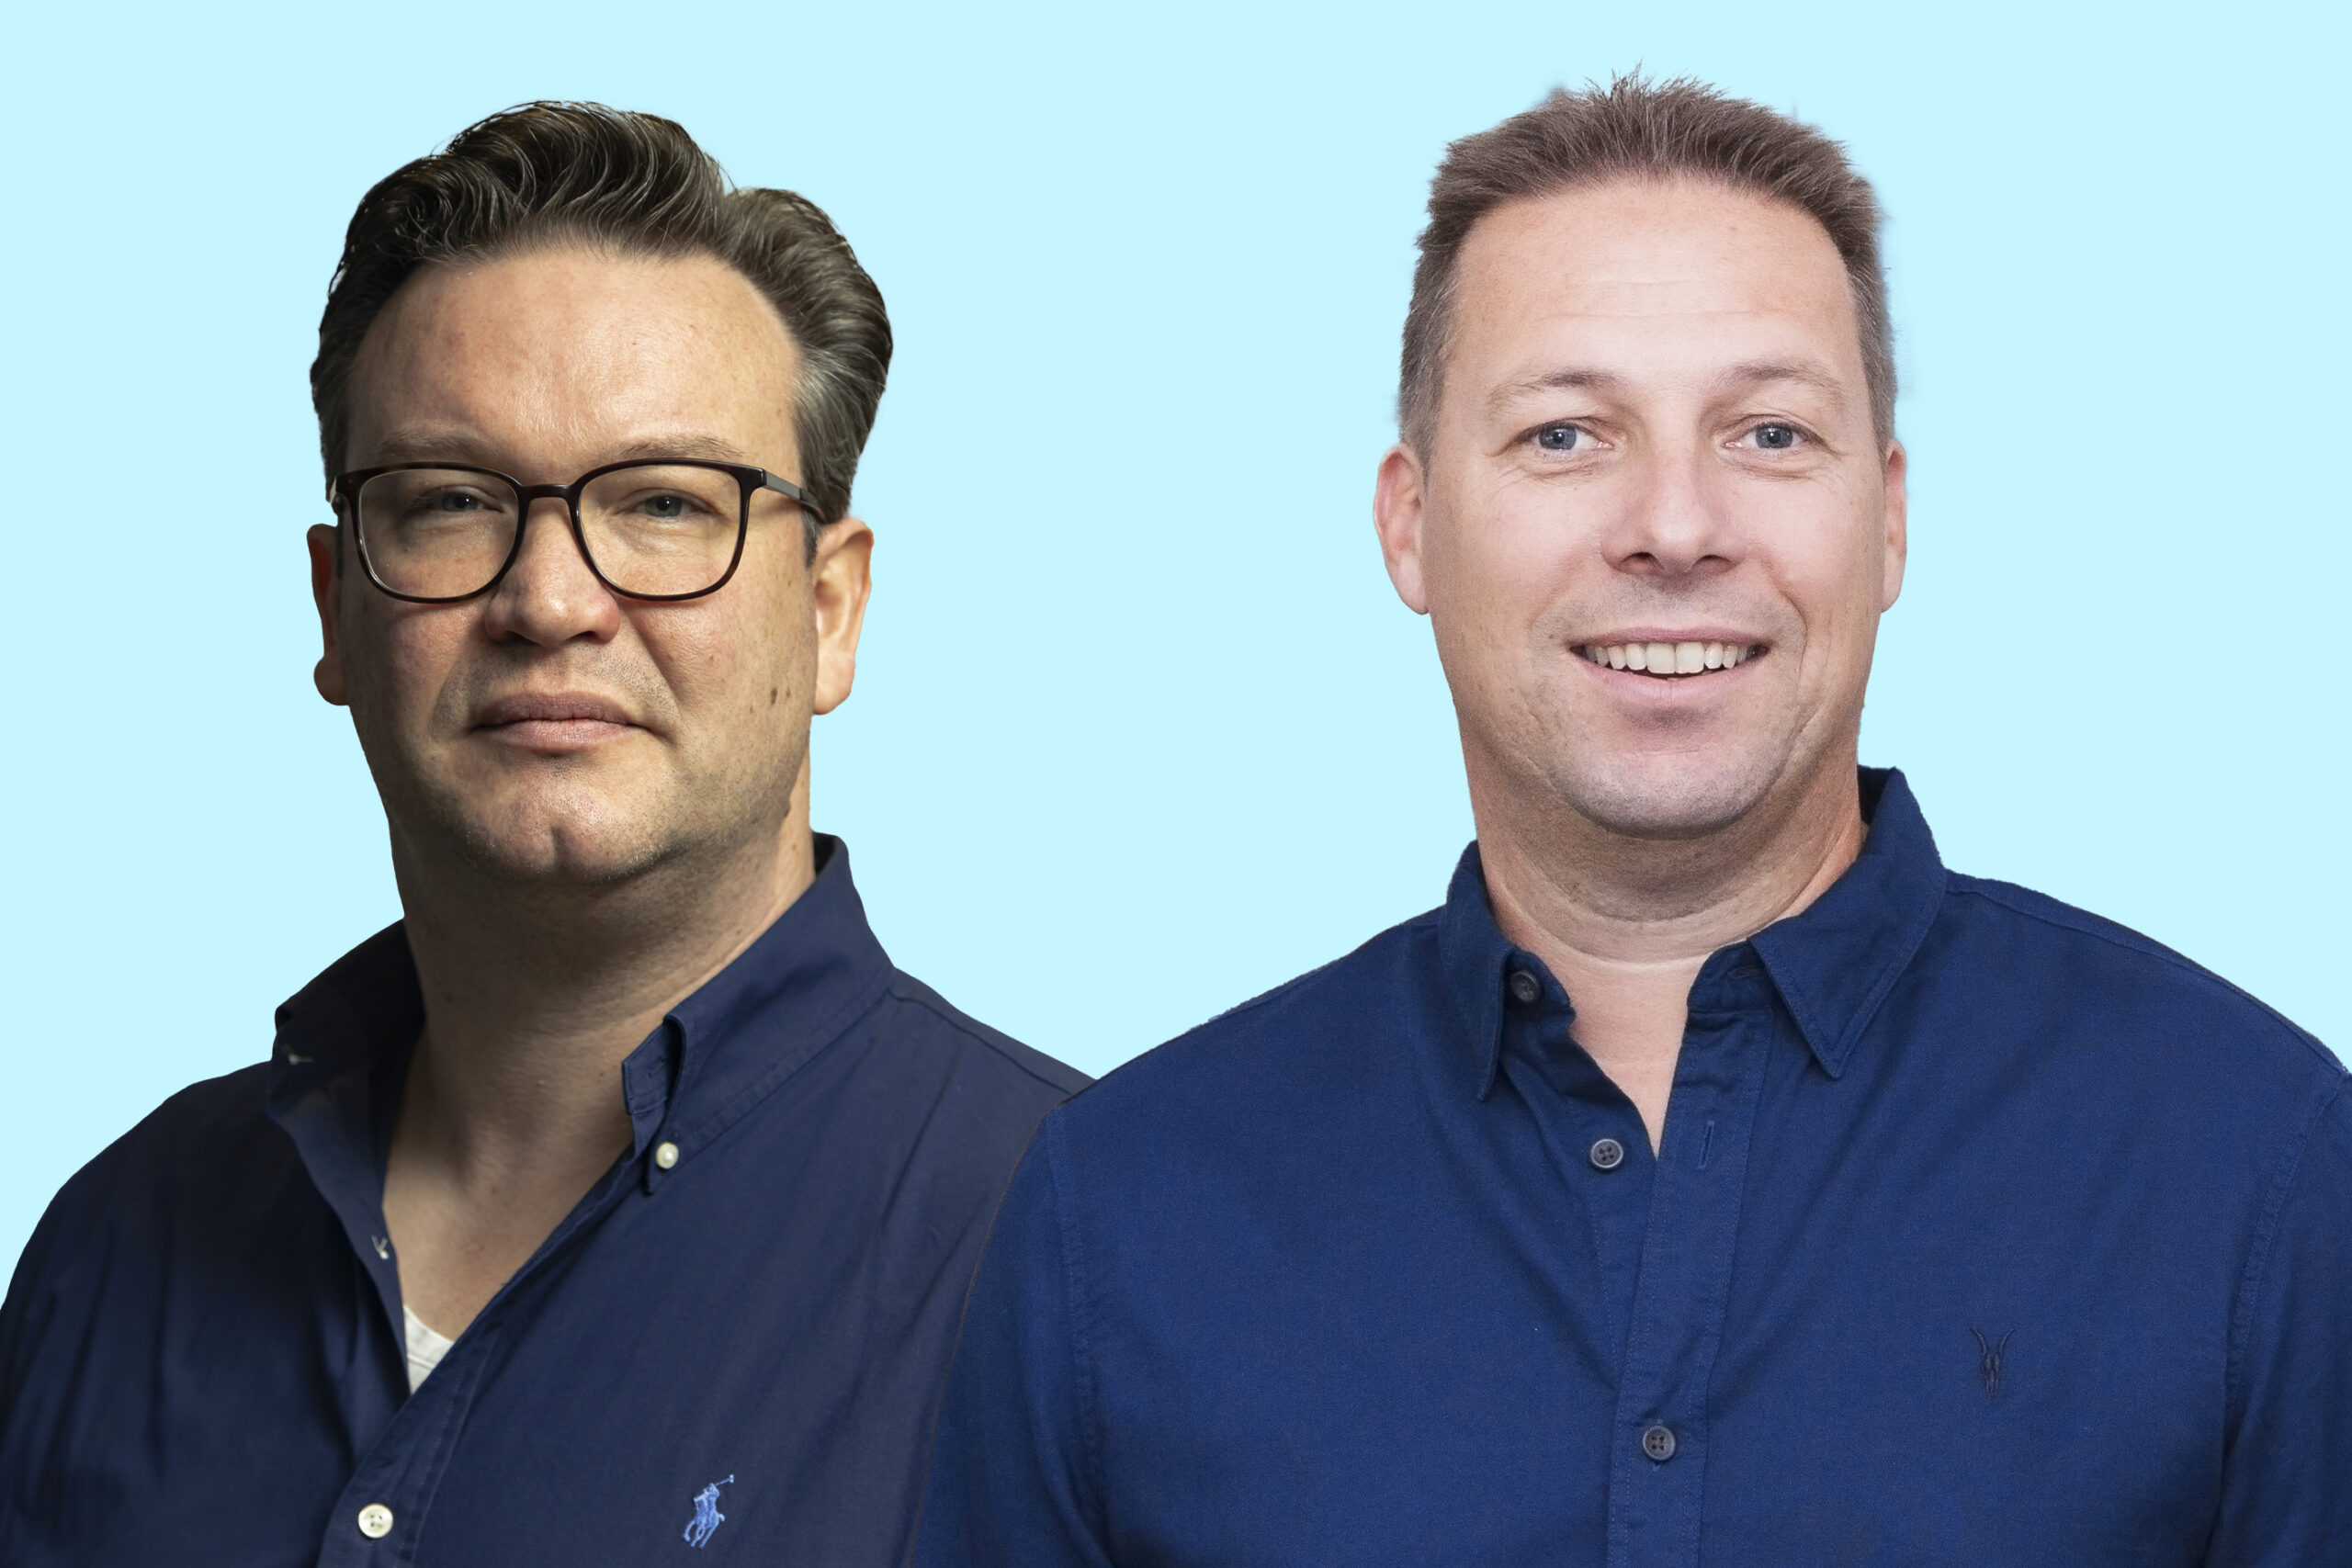 ROGER DE GRAAF AND EWOUT SWART NAMED AS CO-PRESIDENTS OF SPINNIN’ RECORDS